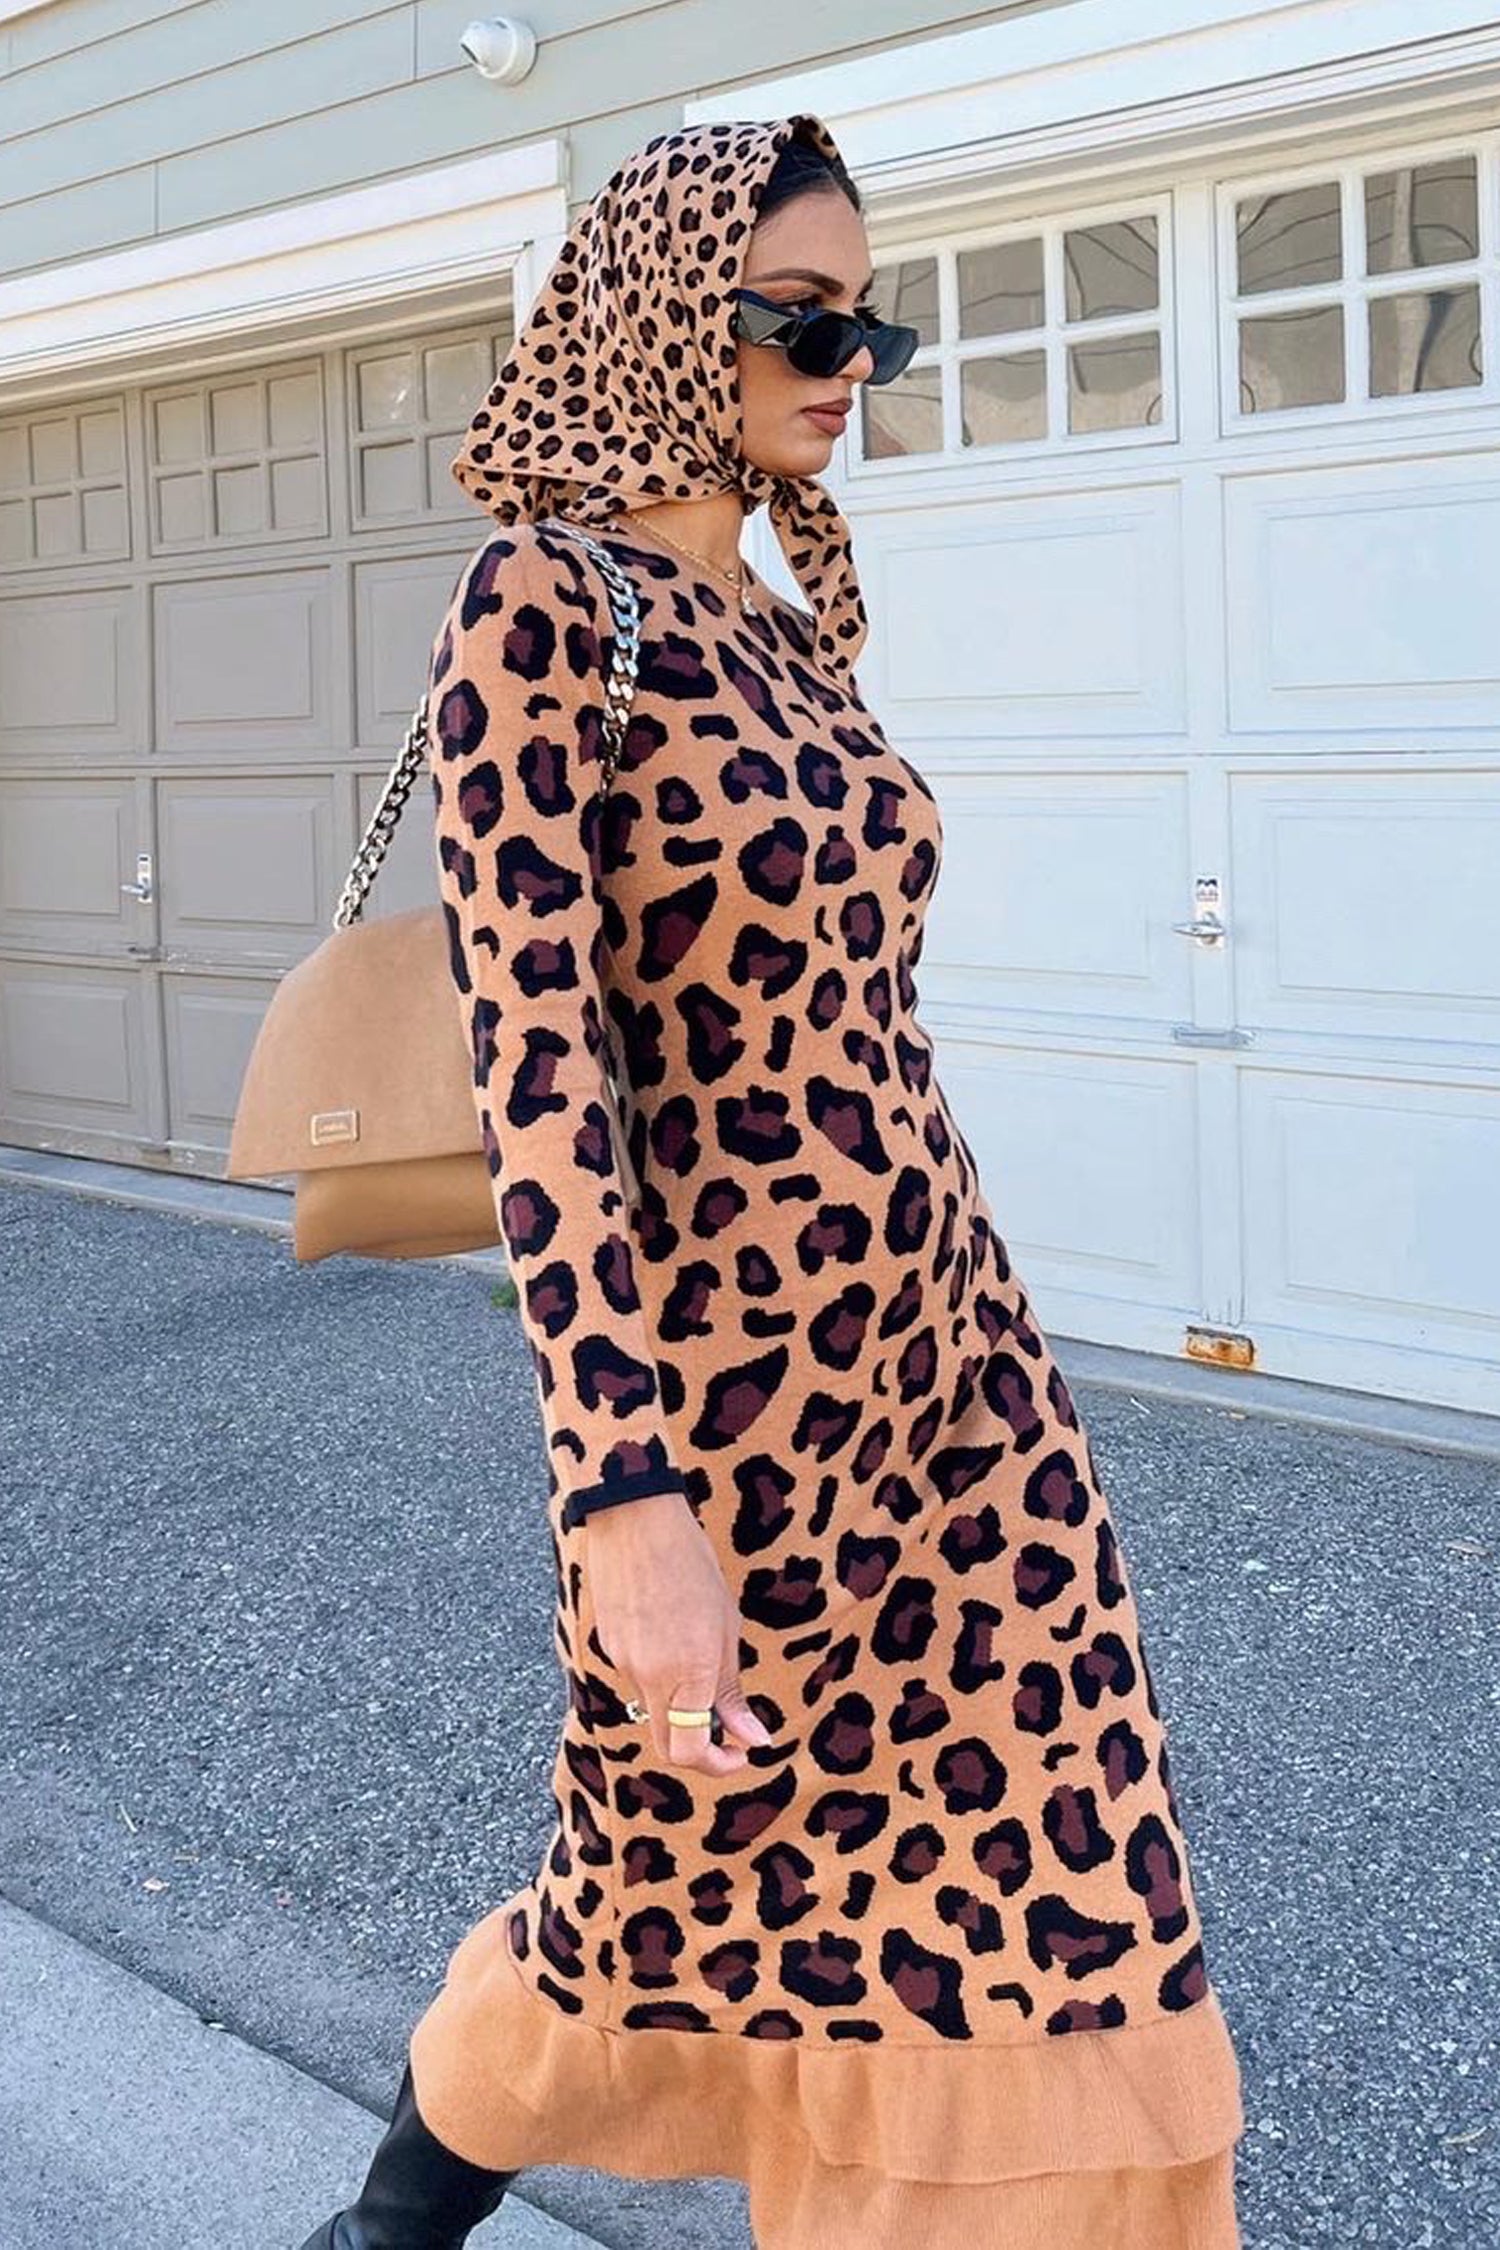 Model wearing Leopard Headscarf standing facing the camera